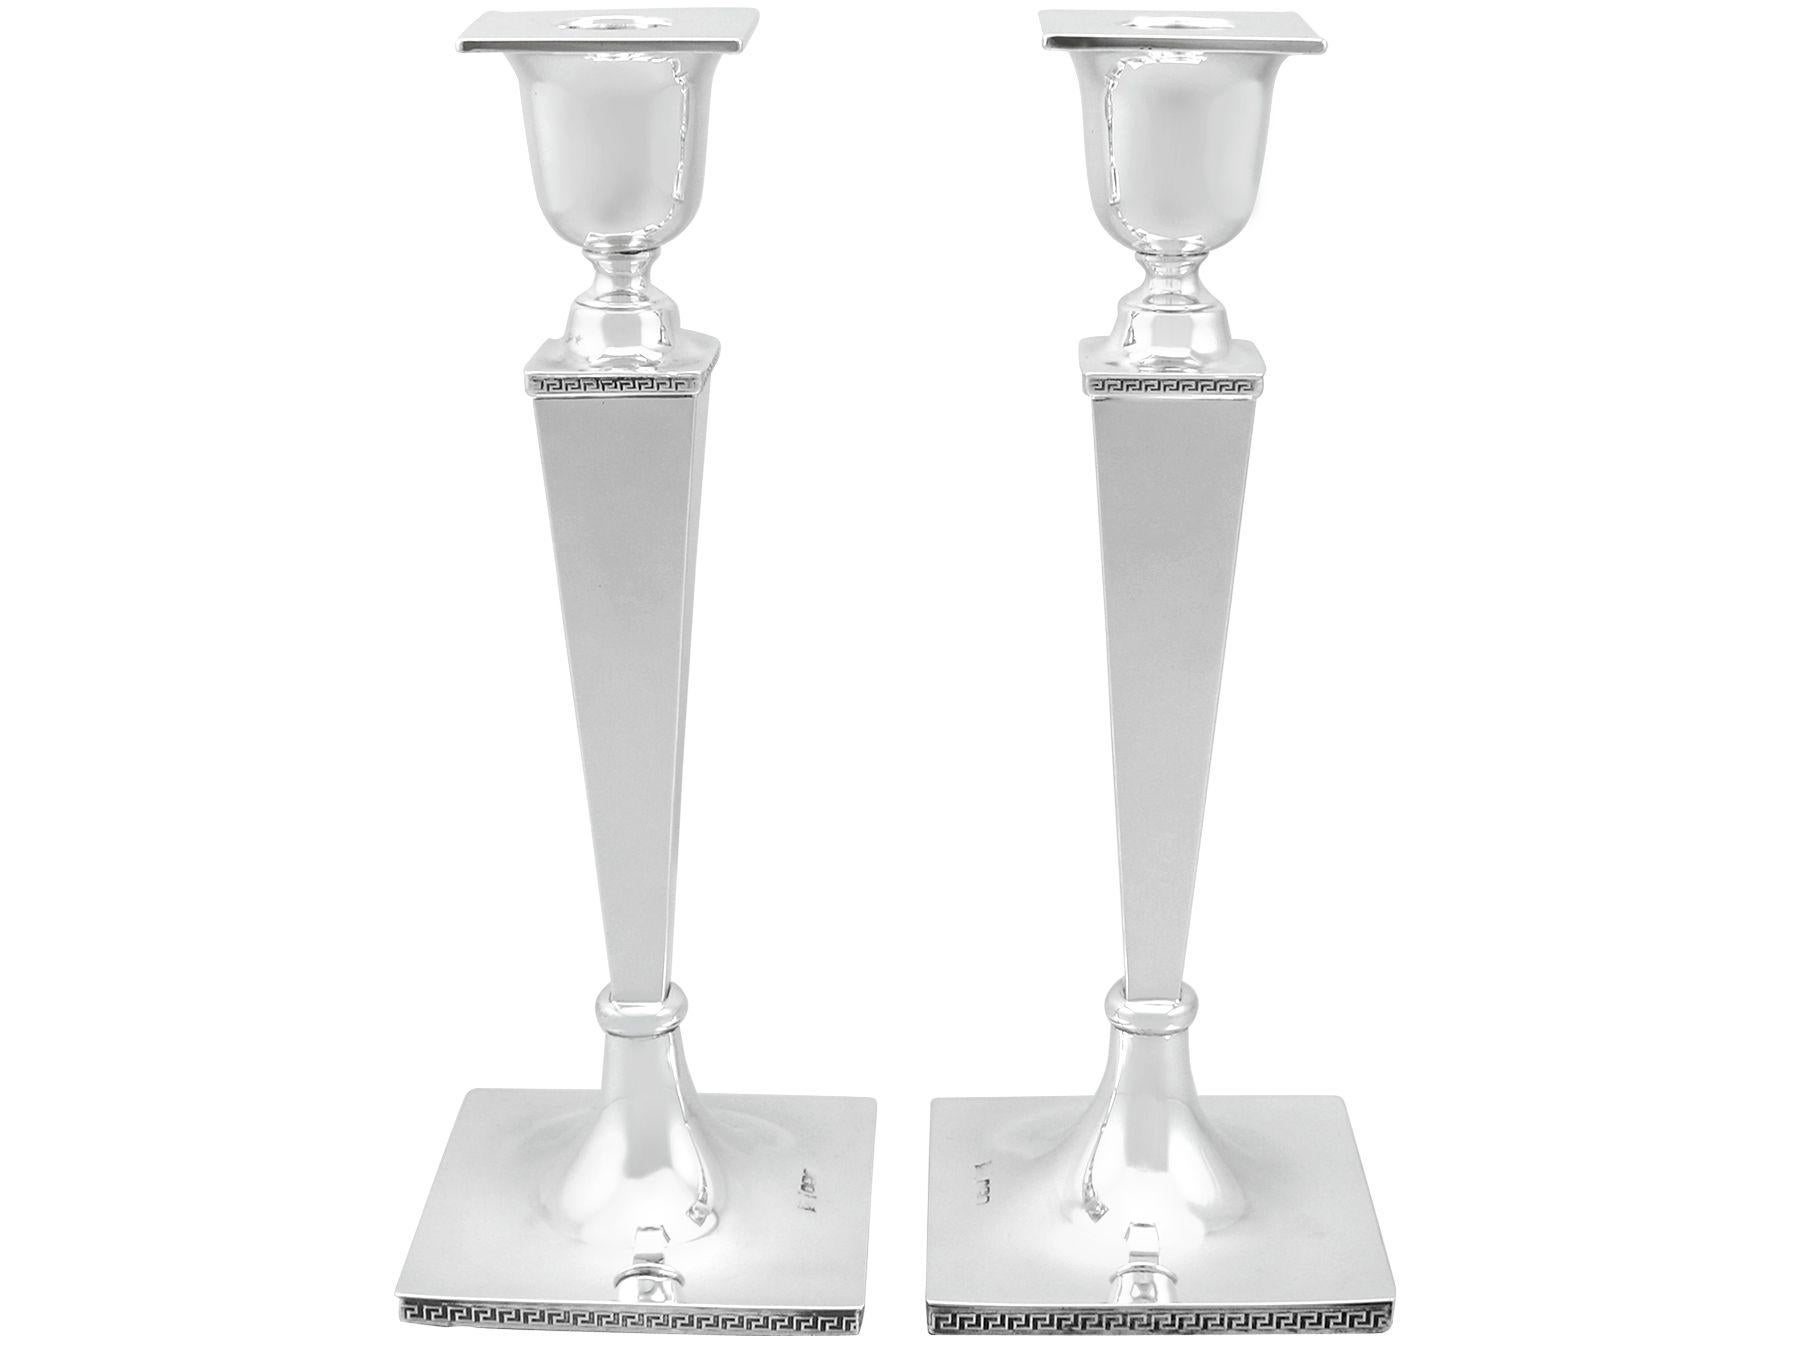 An exceptional, fine and impressive pair of antique George V English sterling silver candlesticks; an addition to our antique silverware collection

These exceptional, fine and impressive antique George V sterling silver candlesticks have a plain